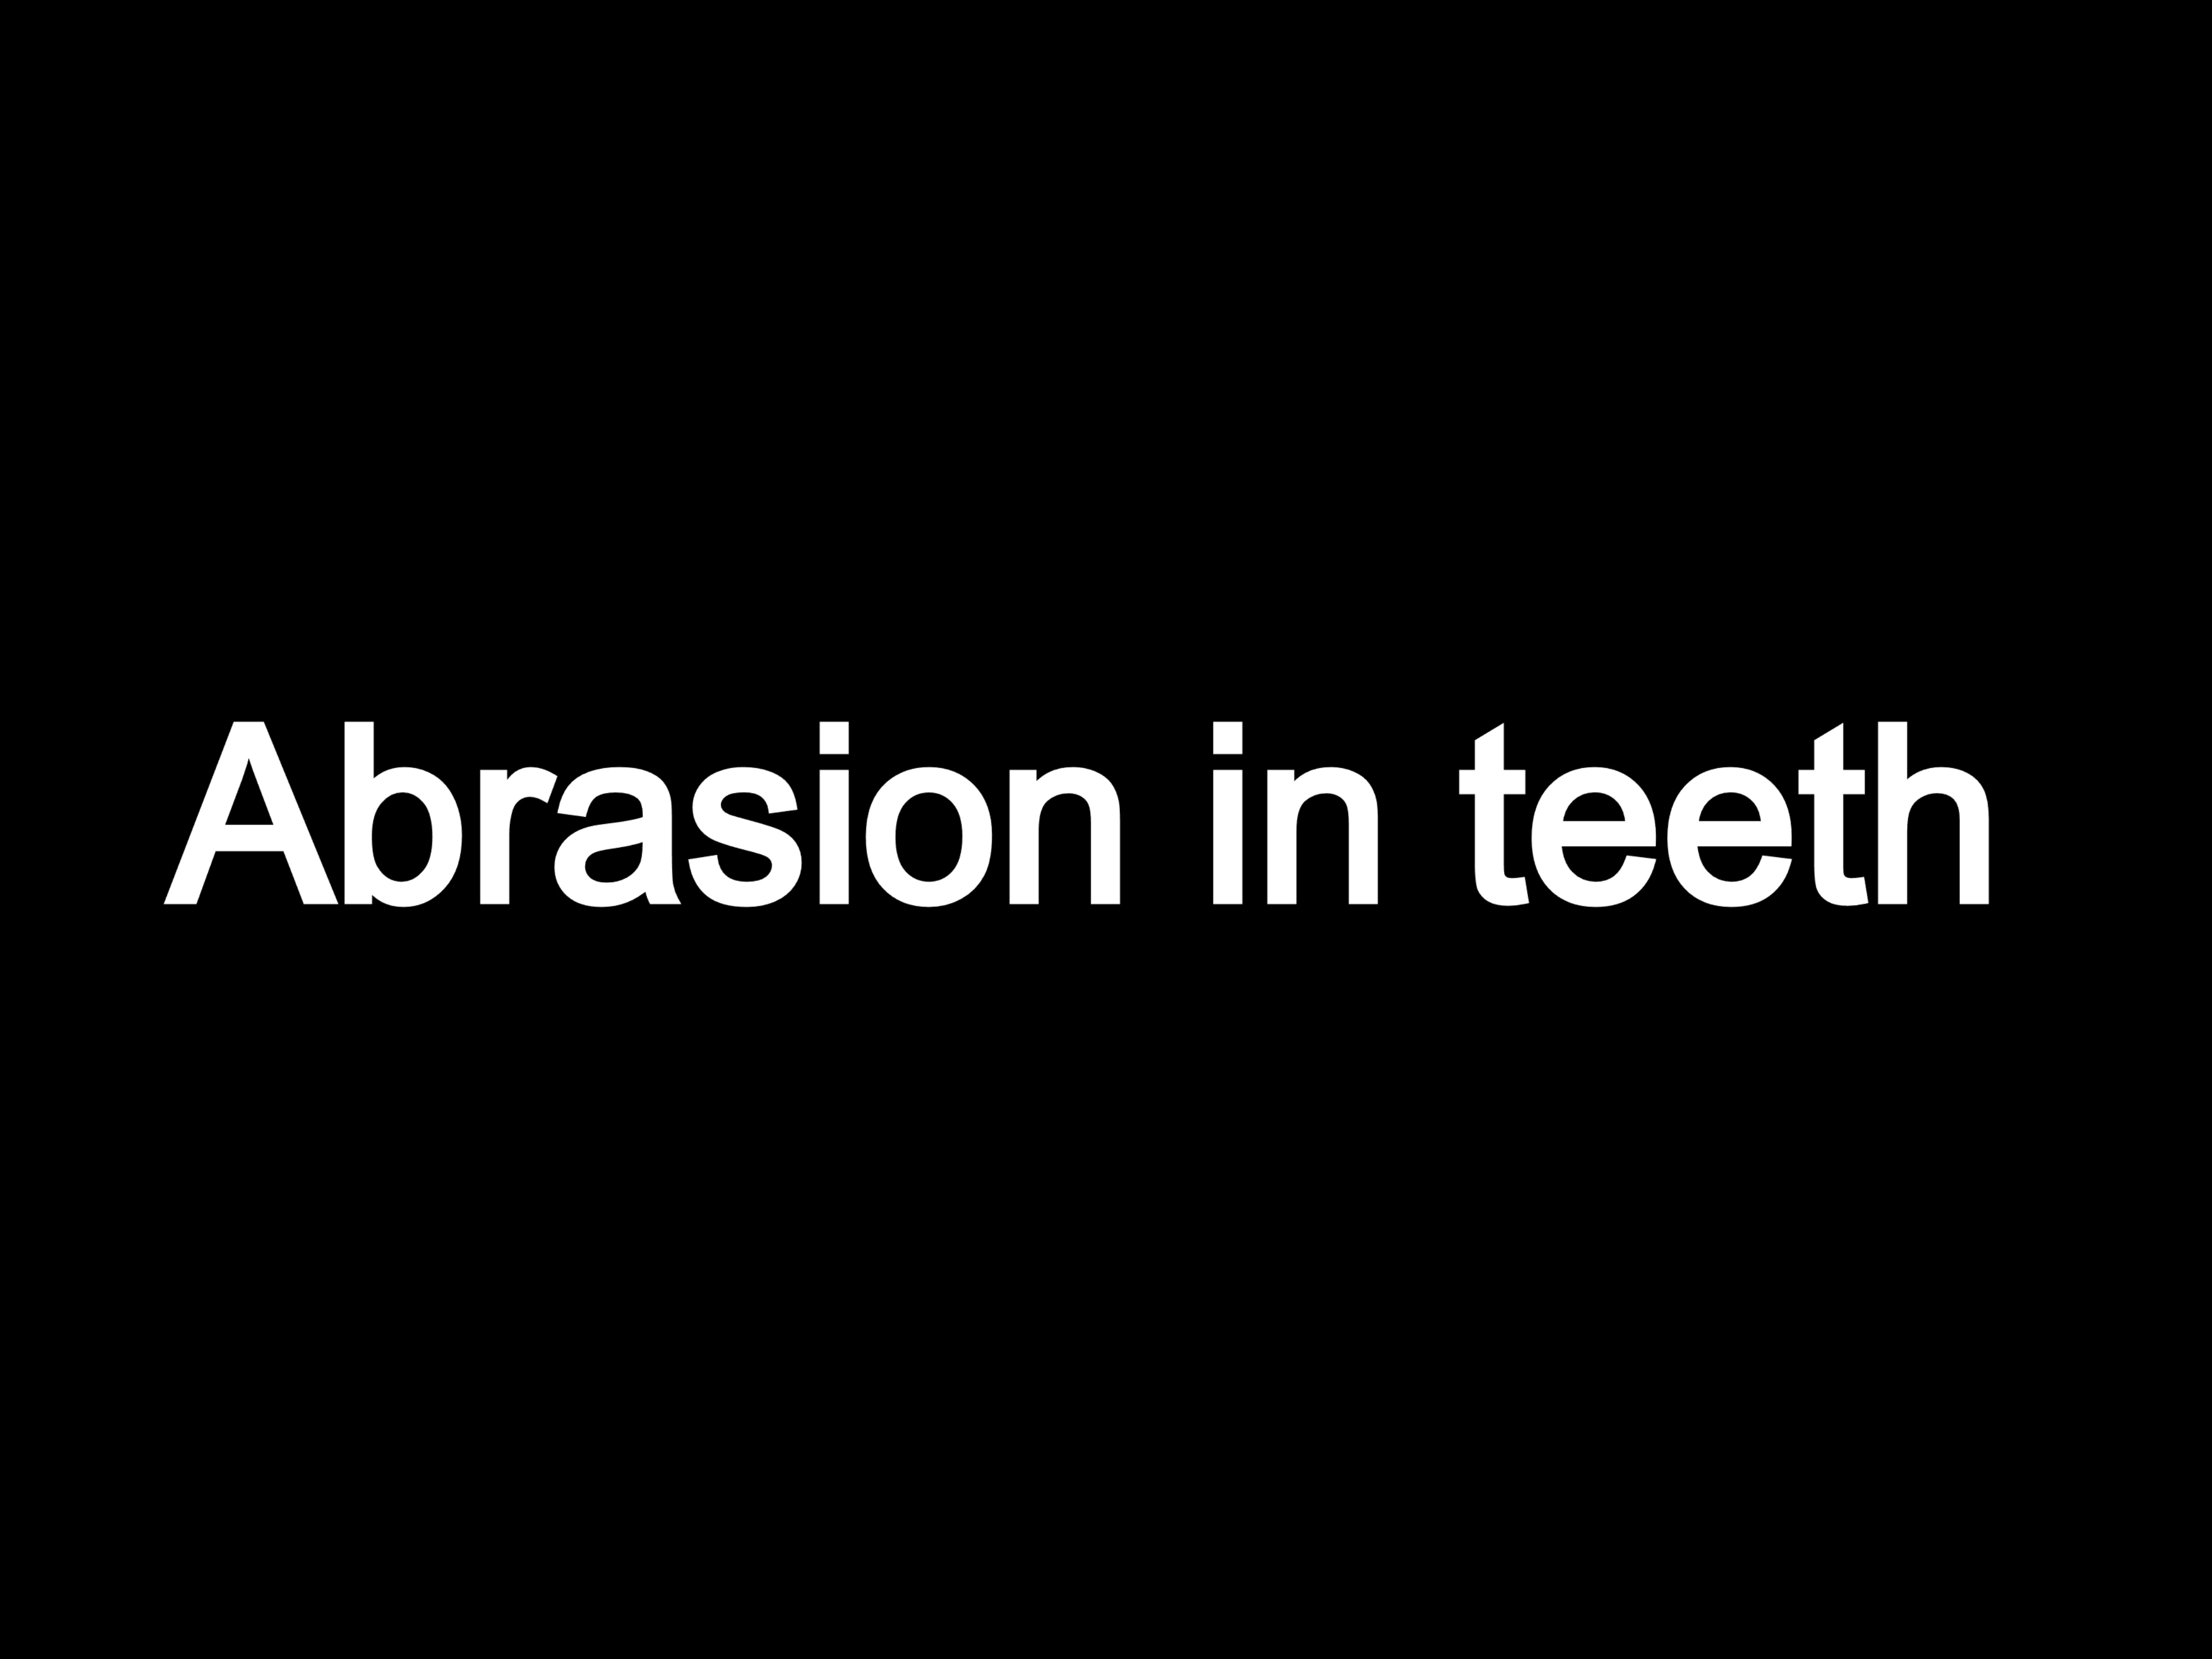 Abrasion in tooth